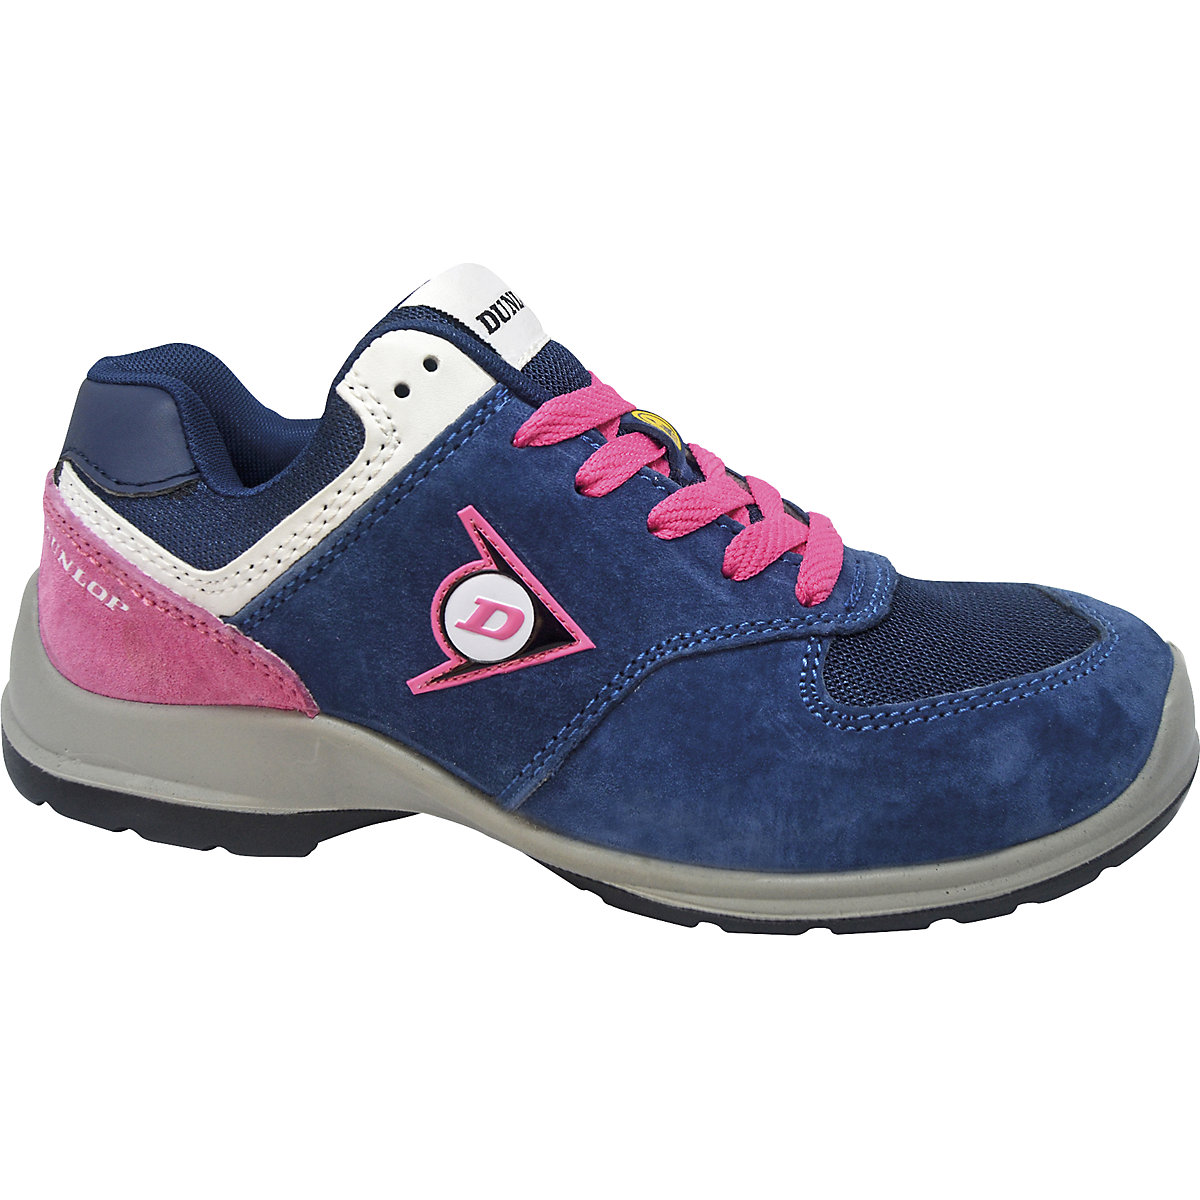 LADY ARROW S3 safety lace-up shoes - DUNLOP